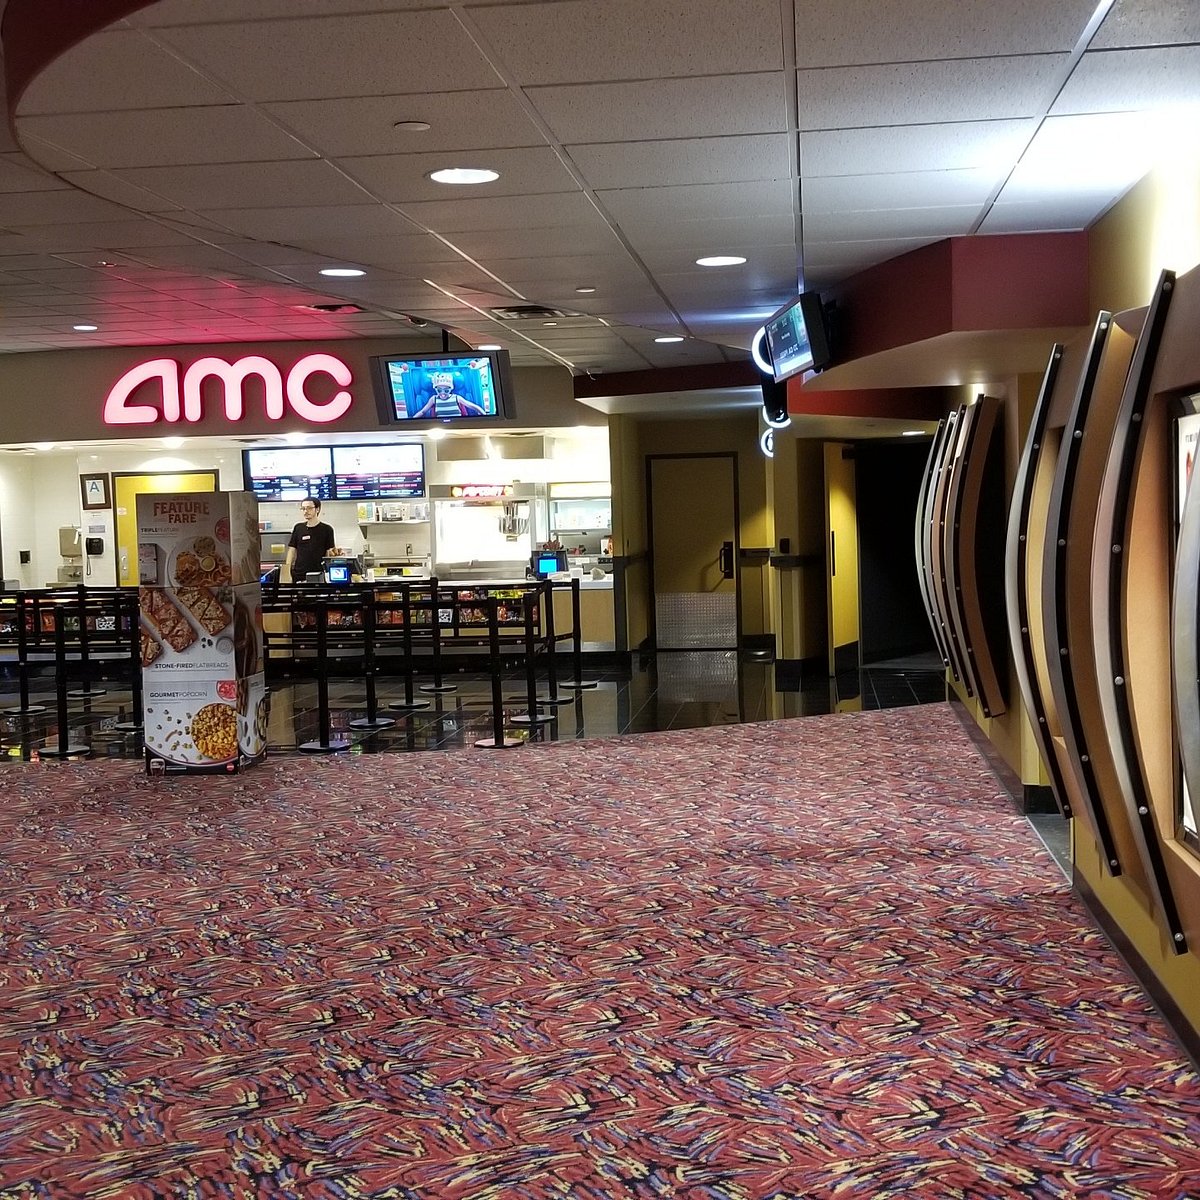 Promenade mall's AMC Theater will close and reopen at Westfield